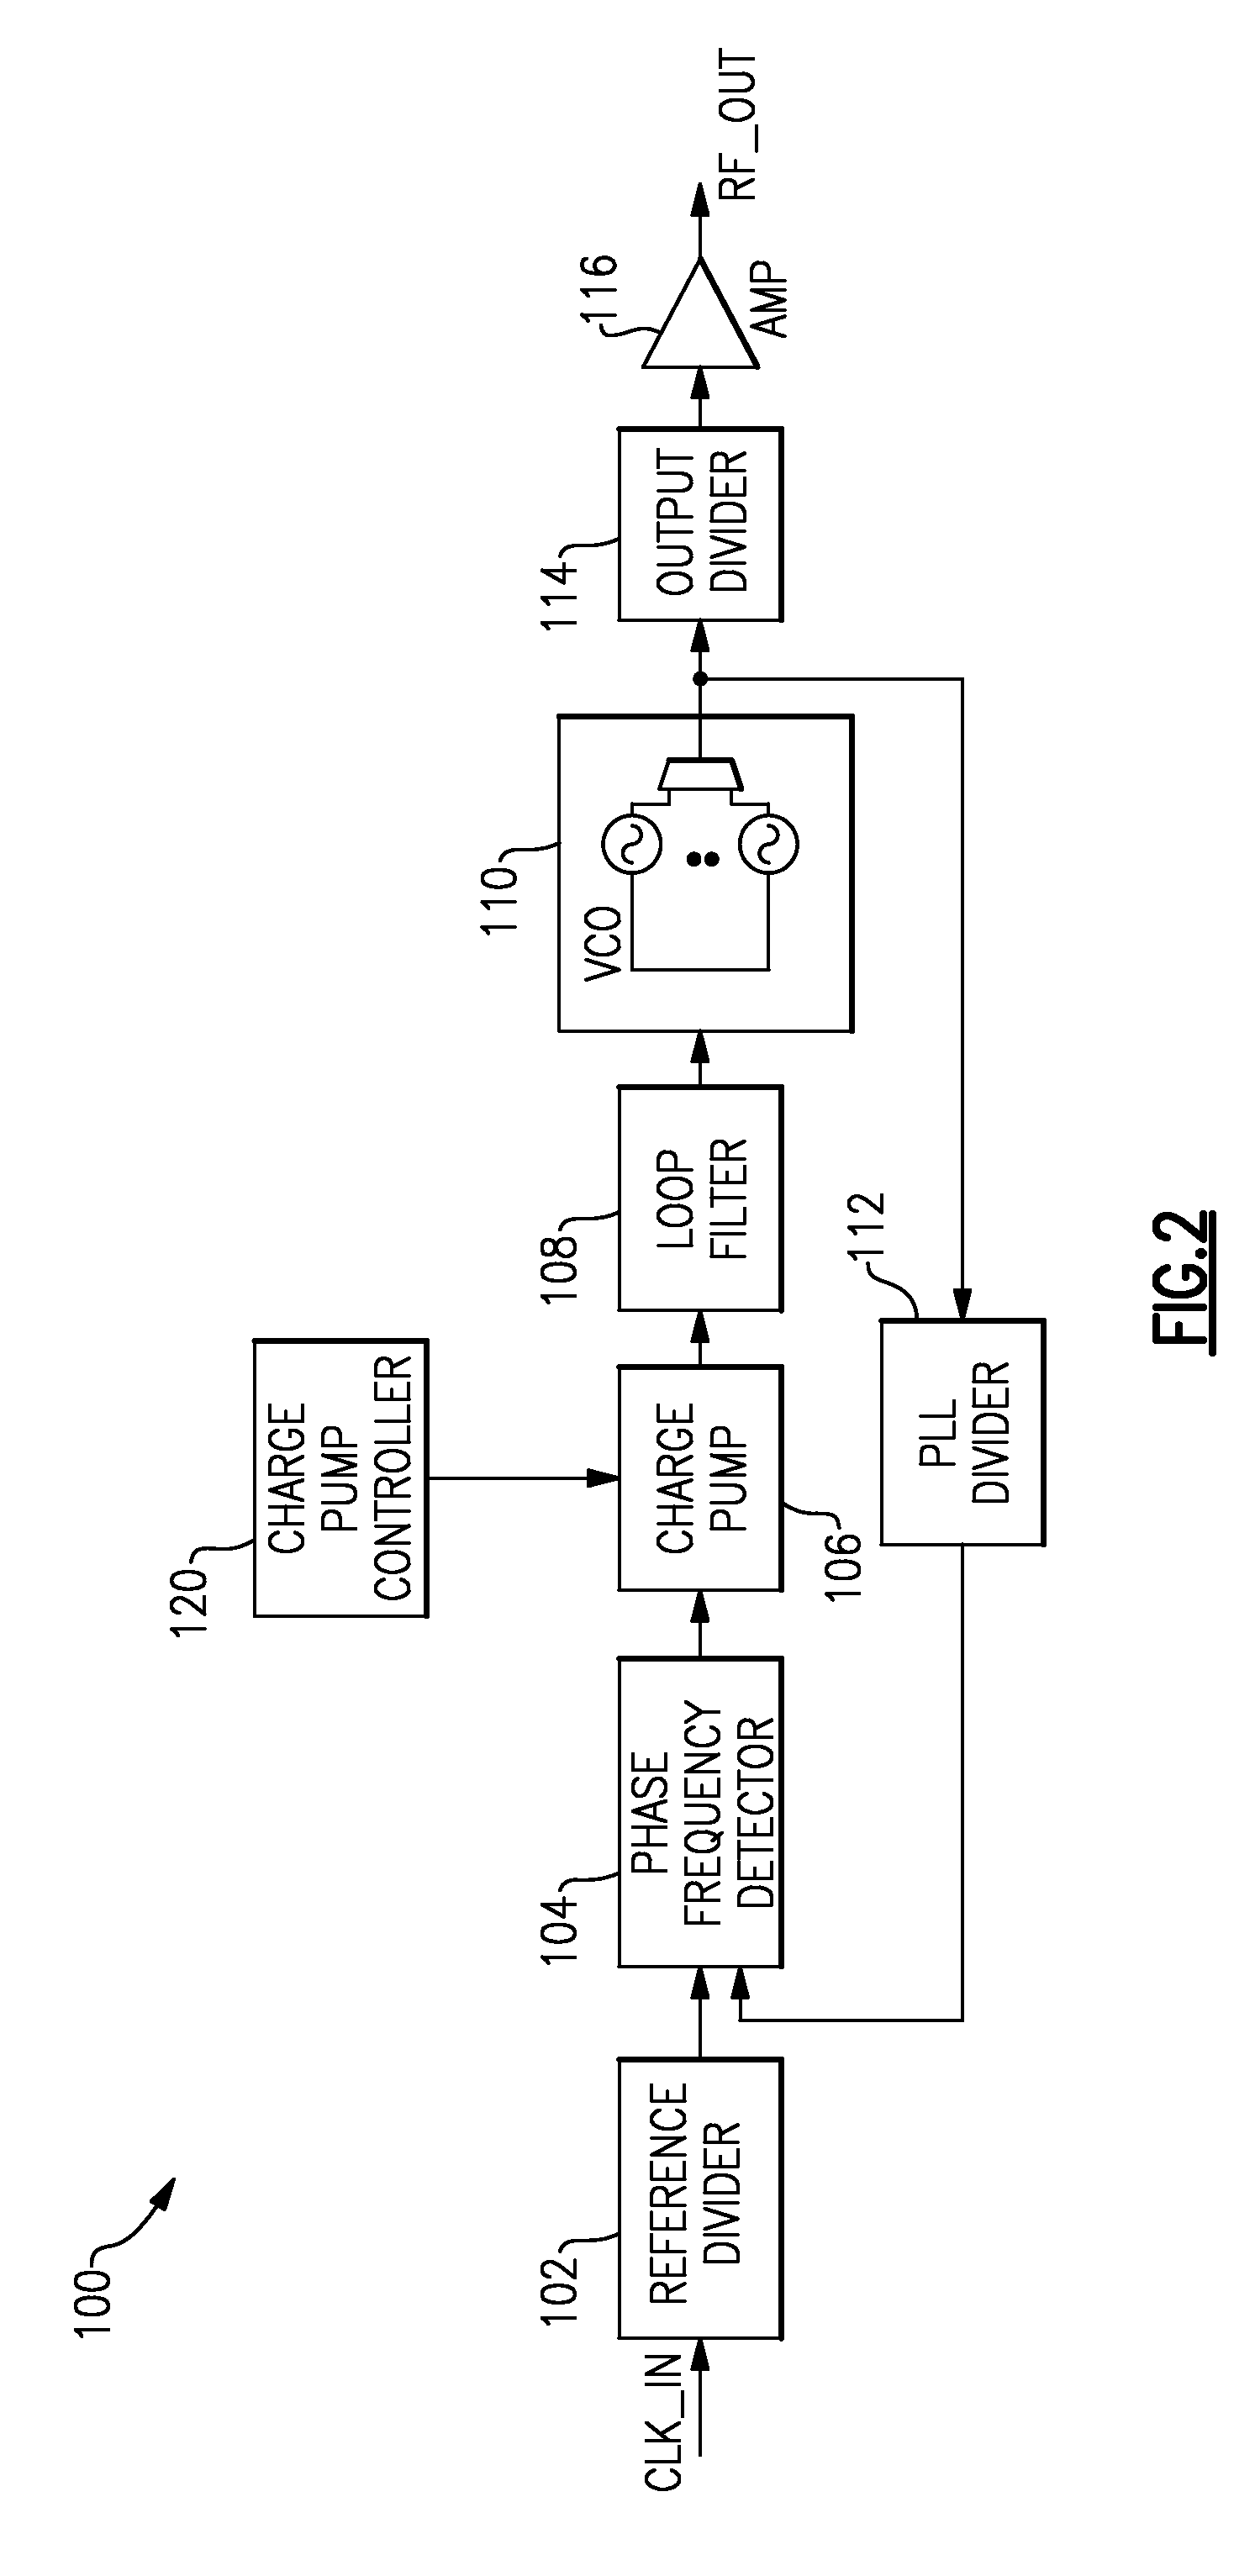 Apparatus and methods for adjusting voltage controlled oscillator gain